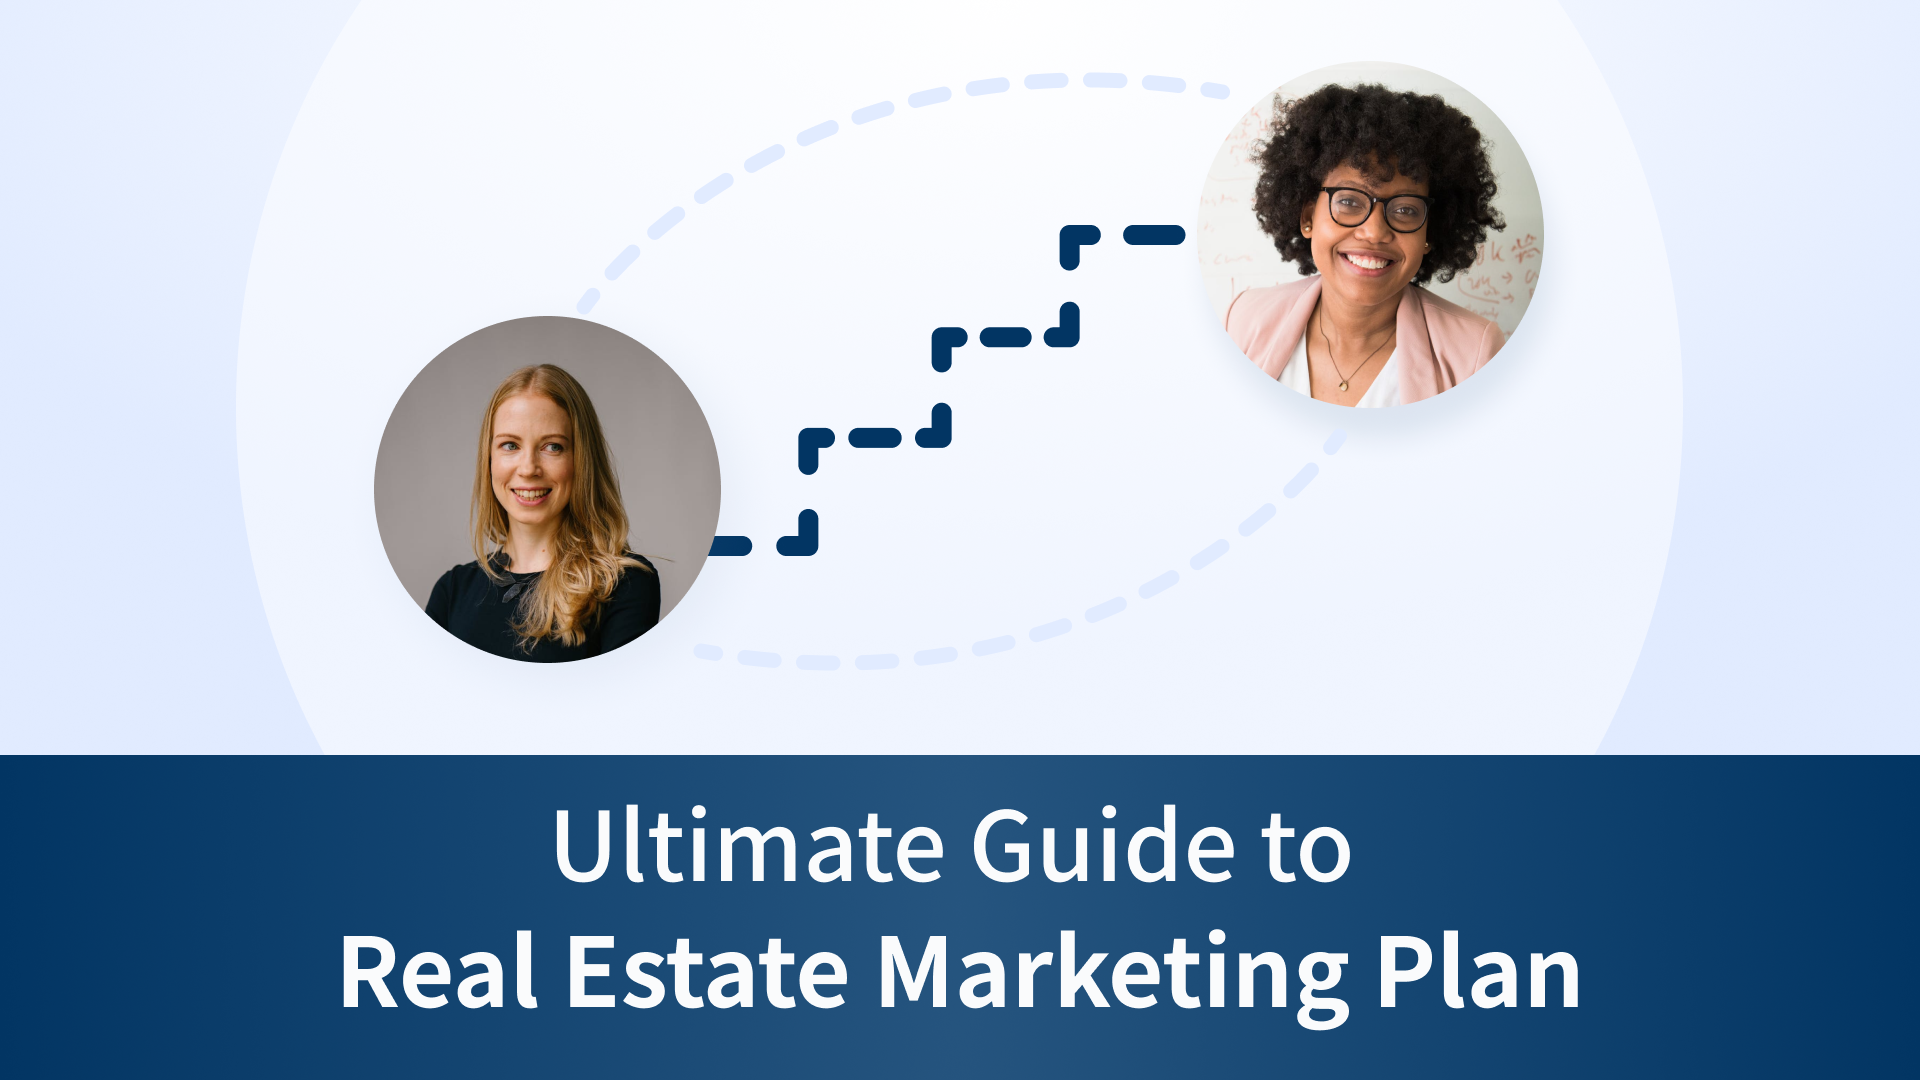 Real Estate Marketing Plan: How to create?